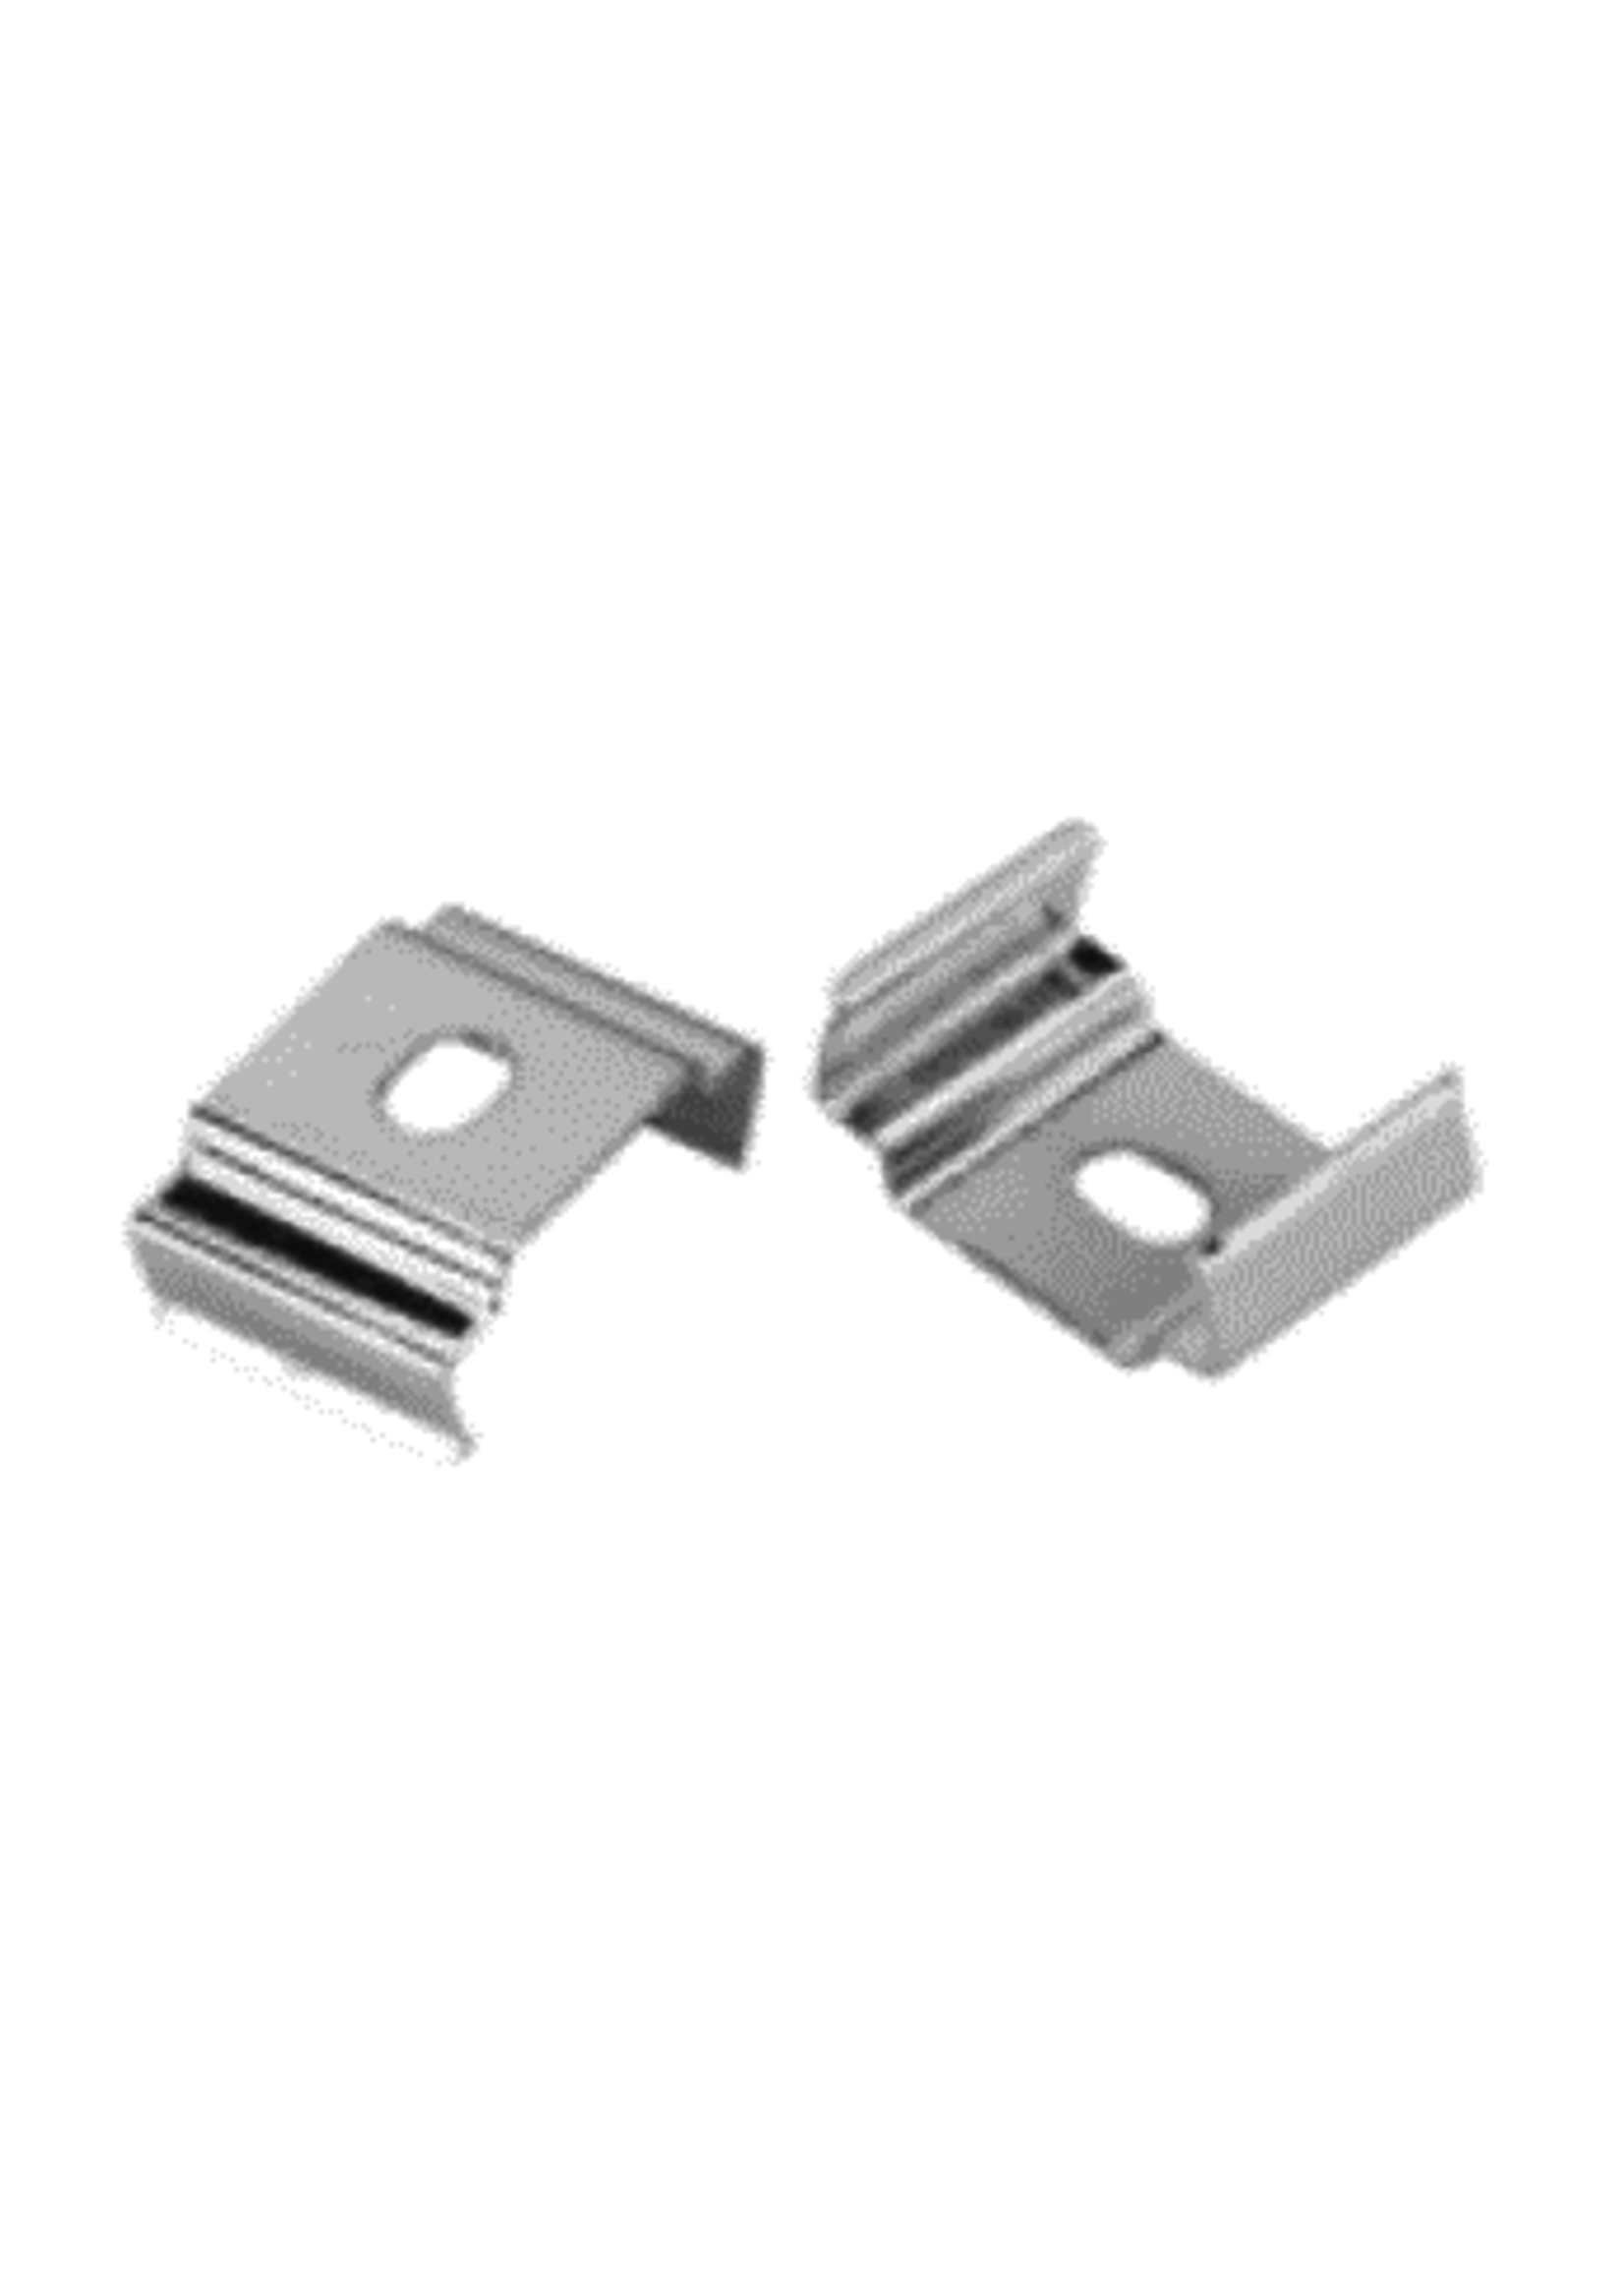 LUMBRA METAL CLIP FOR MOUNTING ALUMINUM CHANNEL (LBMC1715)